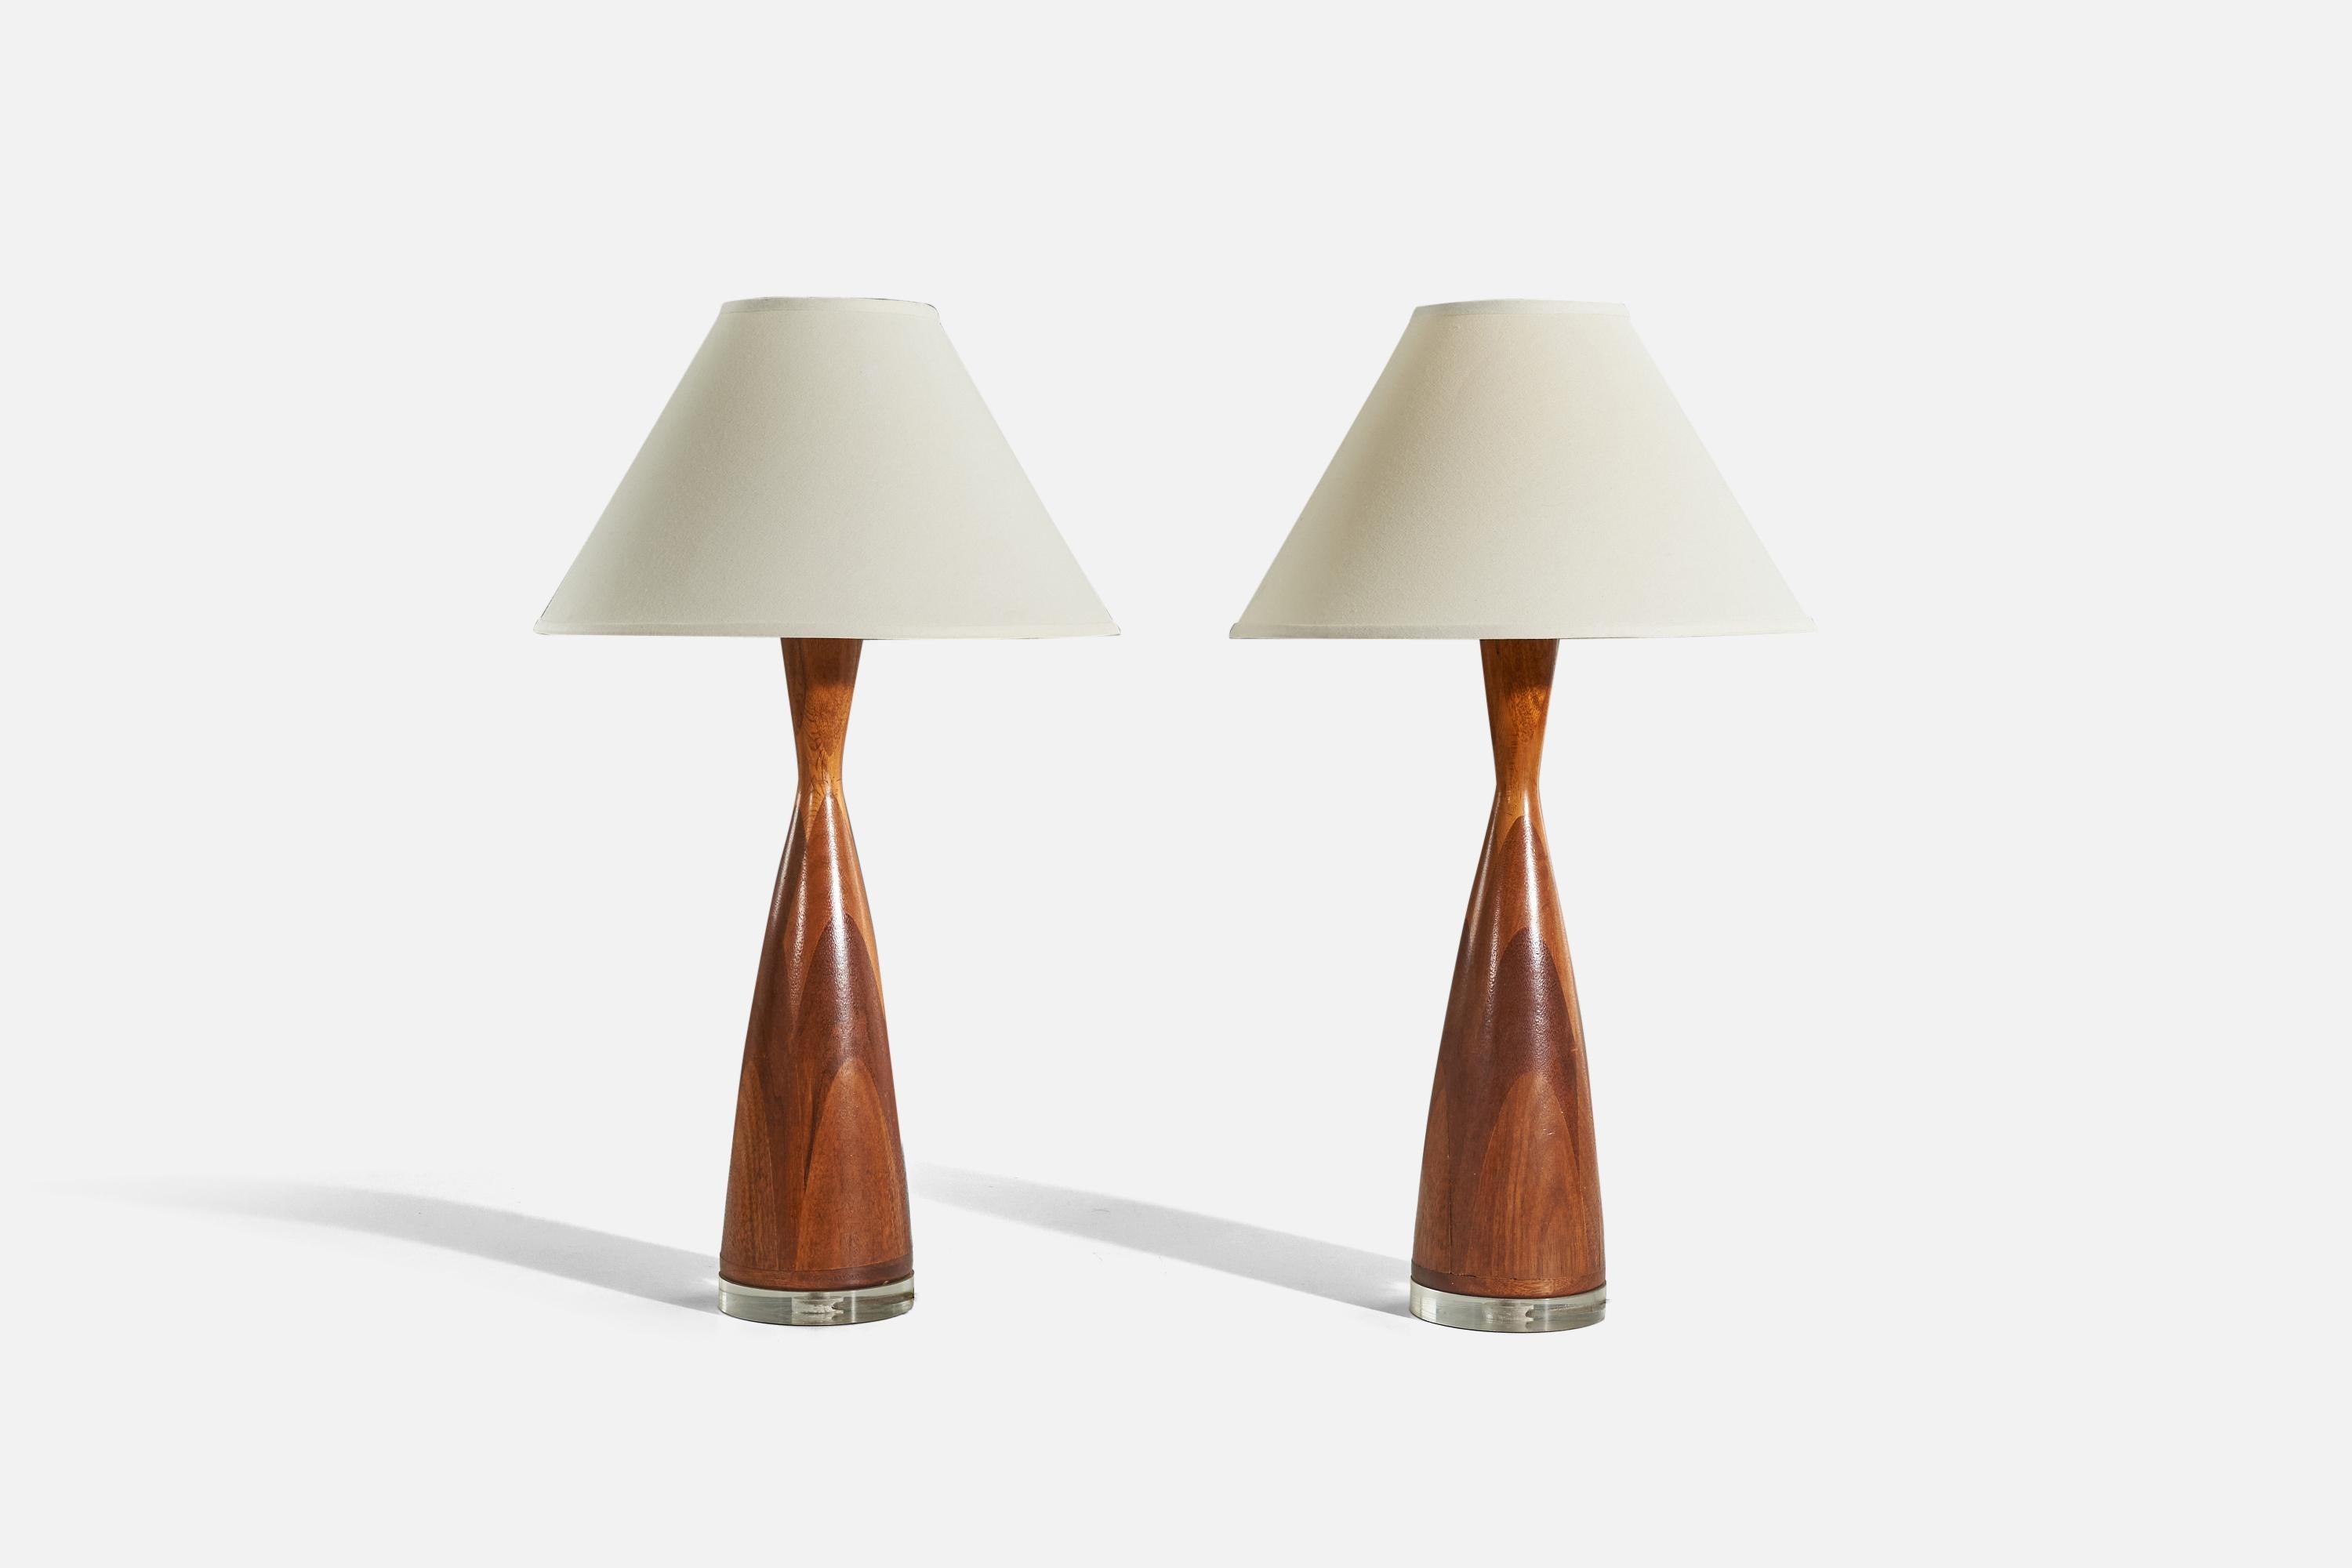 A pair wood and acrylic table lamps designed and produced in the United States, 1960s.

Sold without lampshade. 
Dimensions of lamp (inches) : 24.37 x 5.87 x 5.87 (H x W x D)
Dimensions of shade (inches) : 6 x 17.25 x 11 (T x B x S)
Dimension